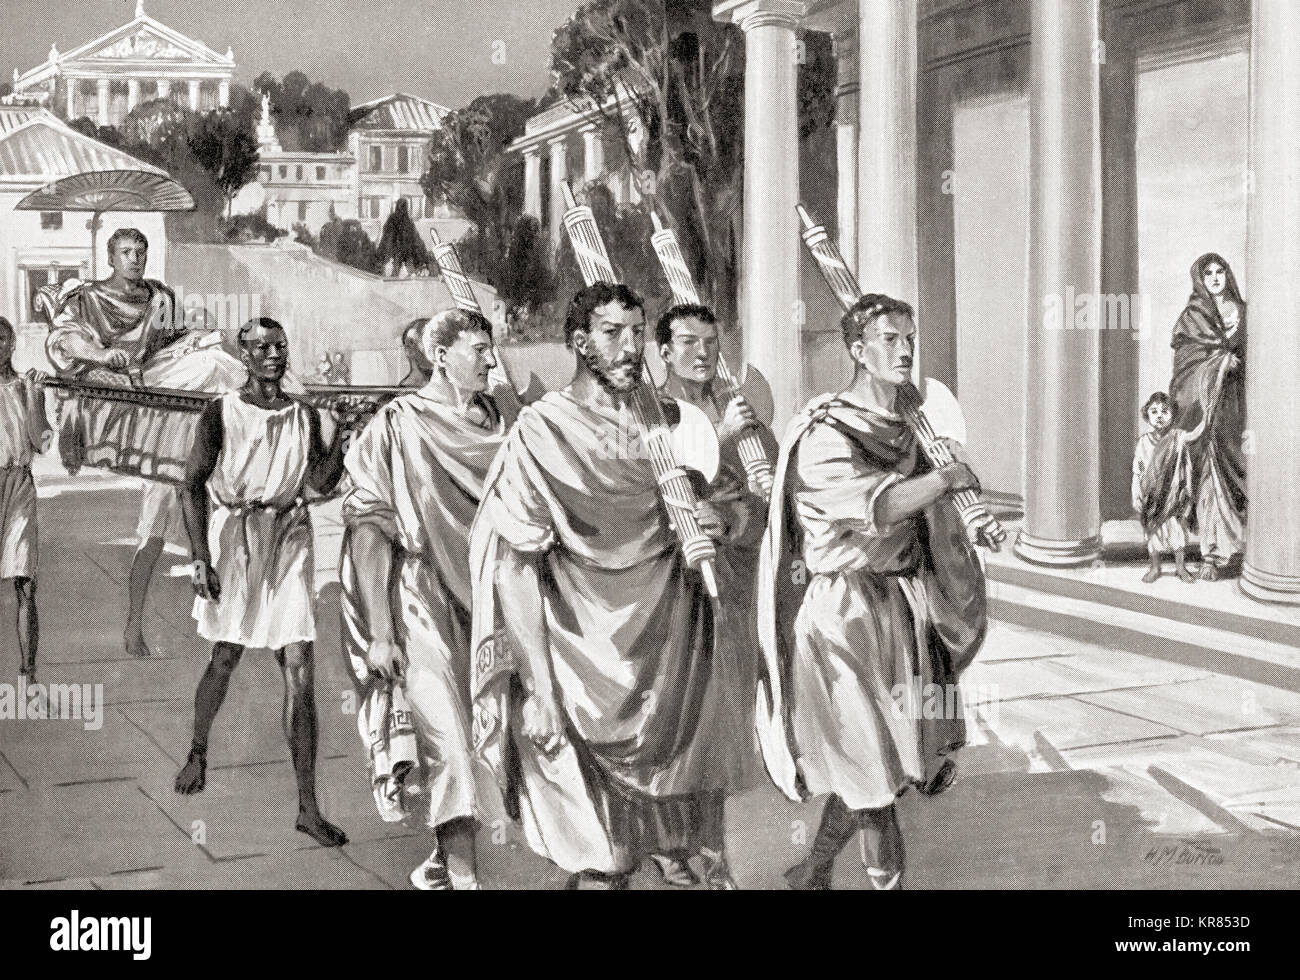 Lictors carrying fasces.  In ancient Rome the Lictors were public officers and bodyguards to the chief Roman magistrates, they carried rods decorated with fasces and inflicted punishment on those sentenced by the magistrate and commanded everyone to pay proper respect to their masters as they went through the city.   From Hutchinson's History of the Nations, published 1915. Stock Photo